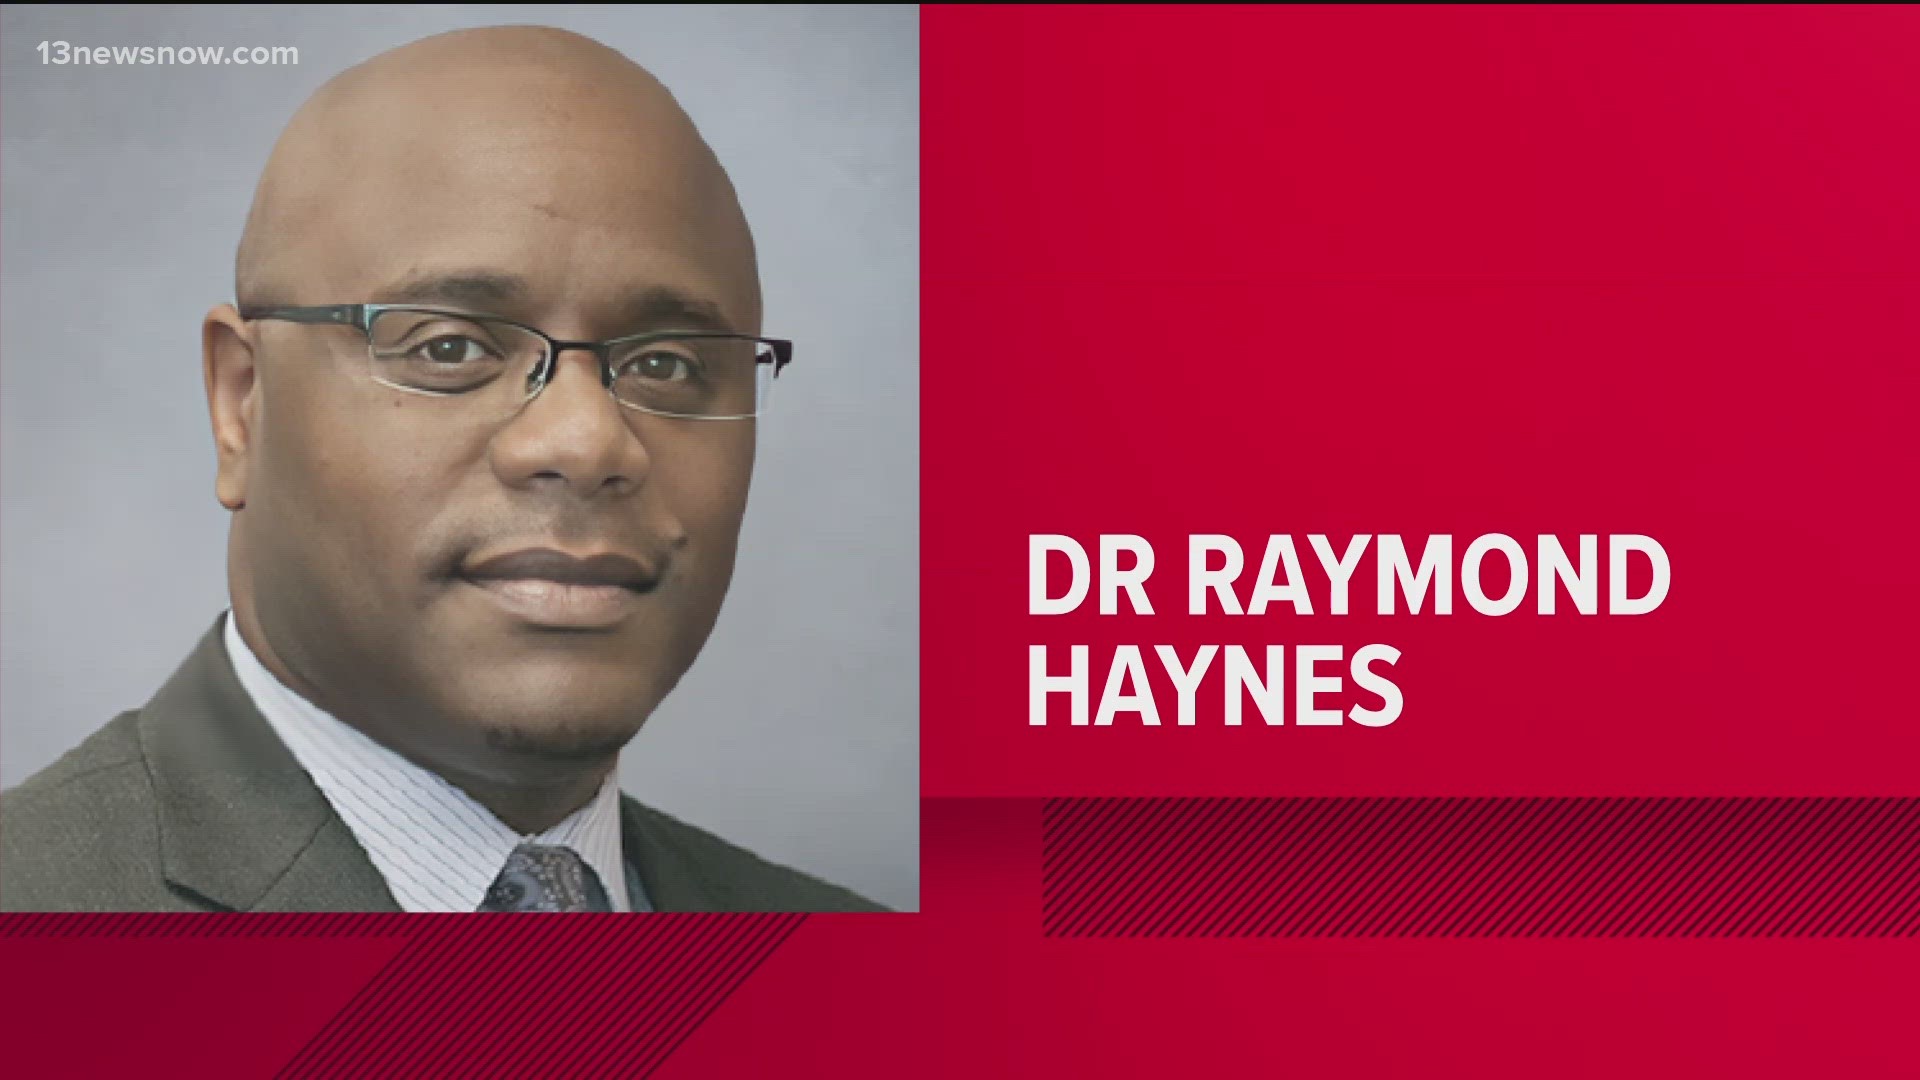 Dr. Raymond Haynes was unanimously approved by the Hampton School Board as the next superintendent for Hampton City Schools during a school board meeting.